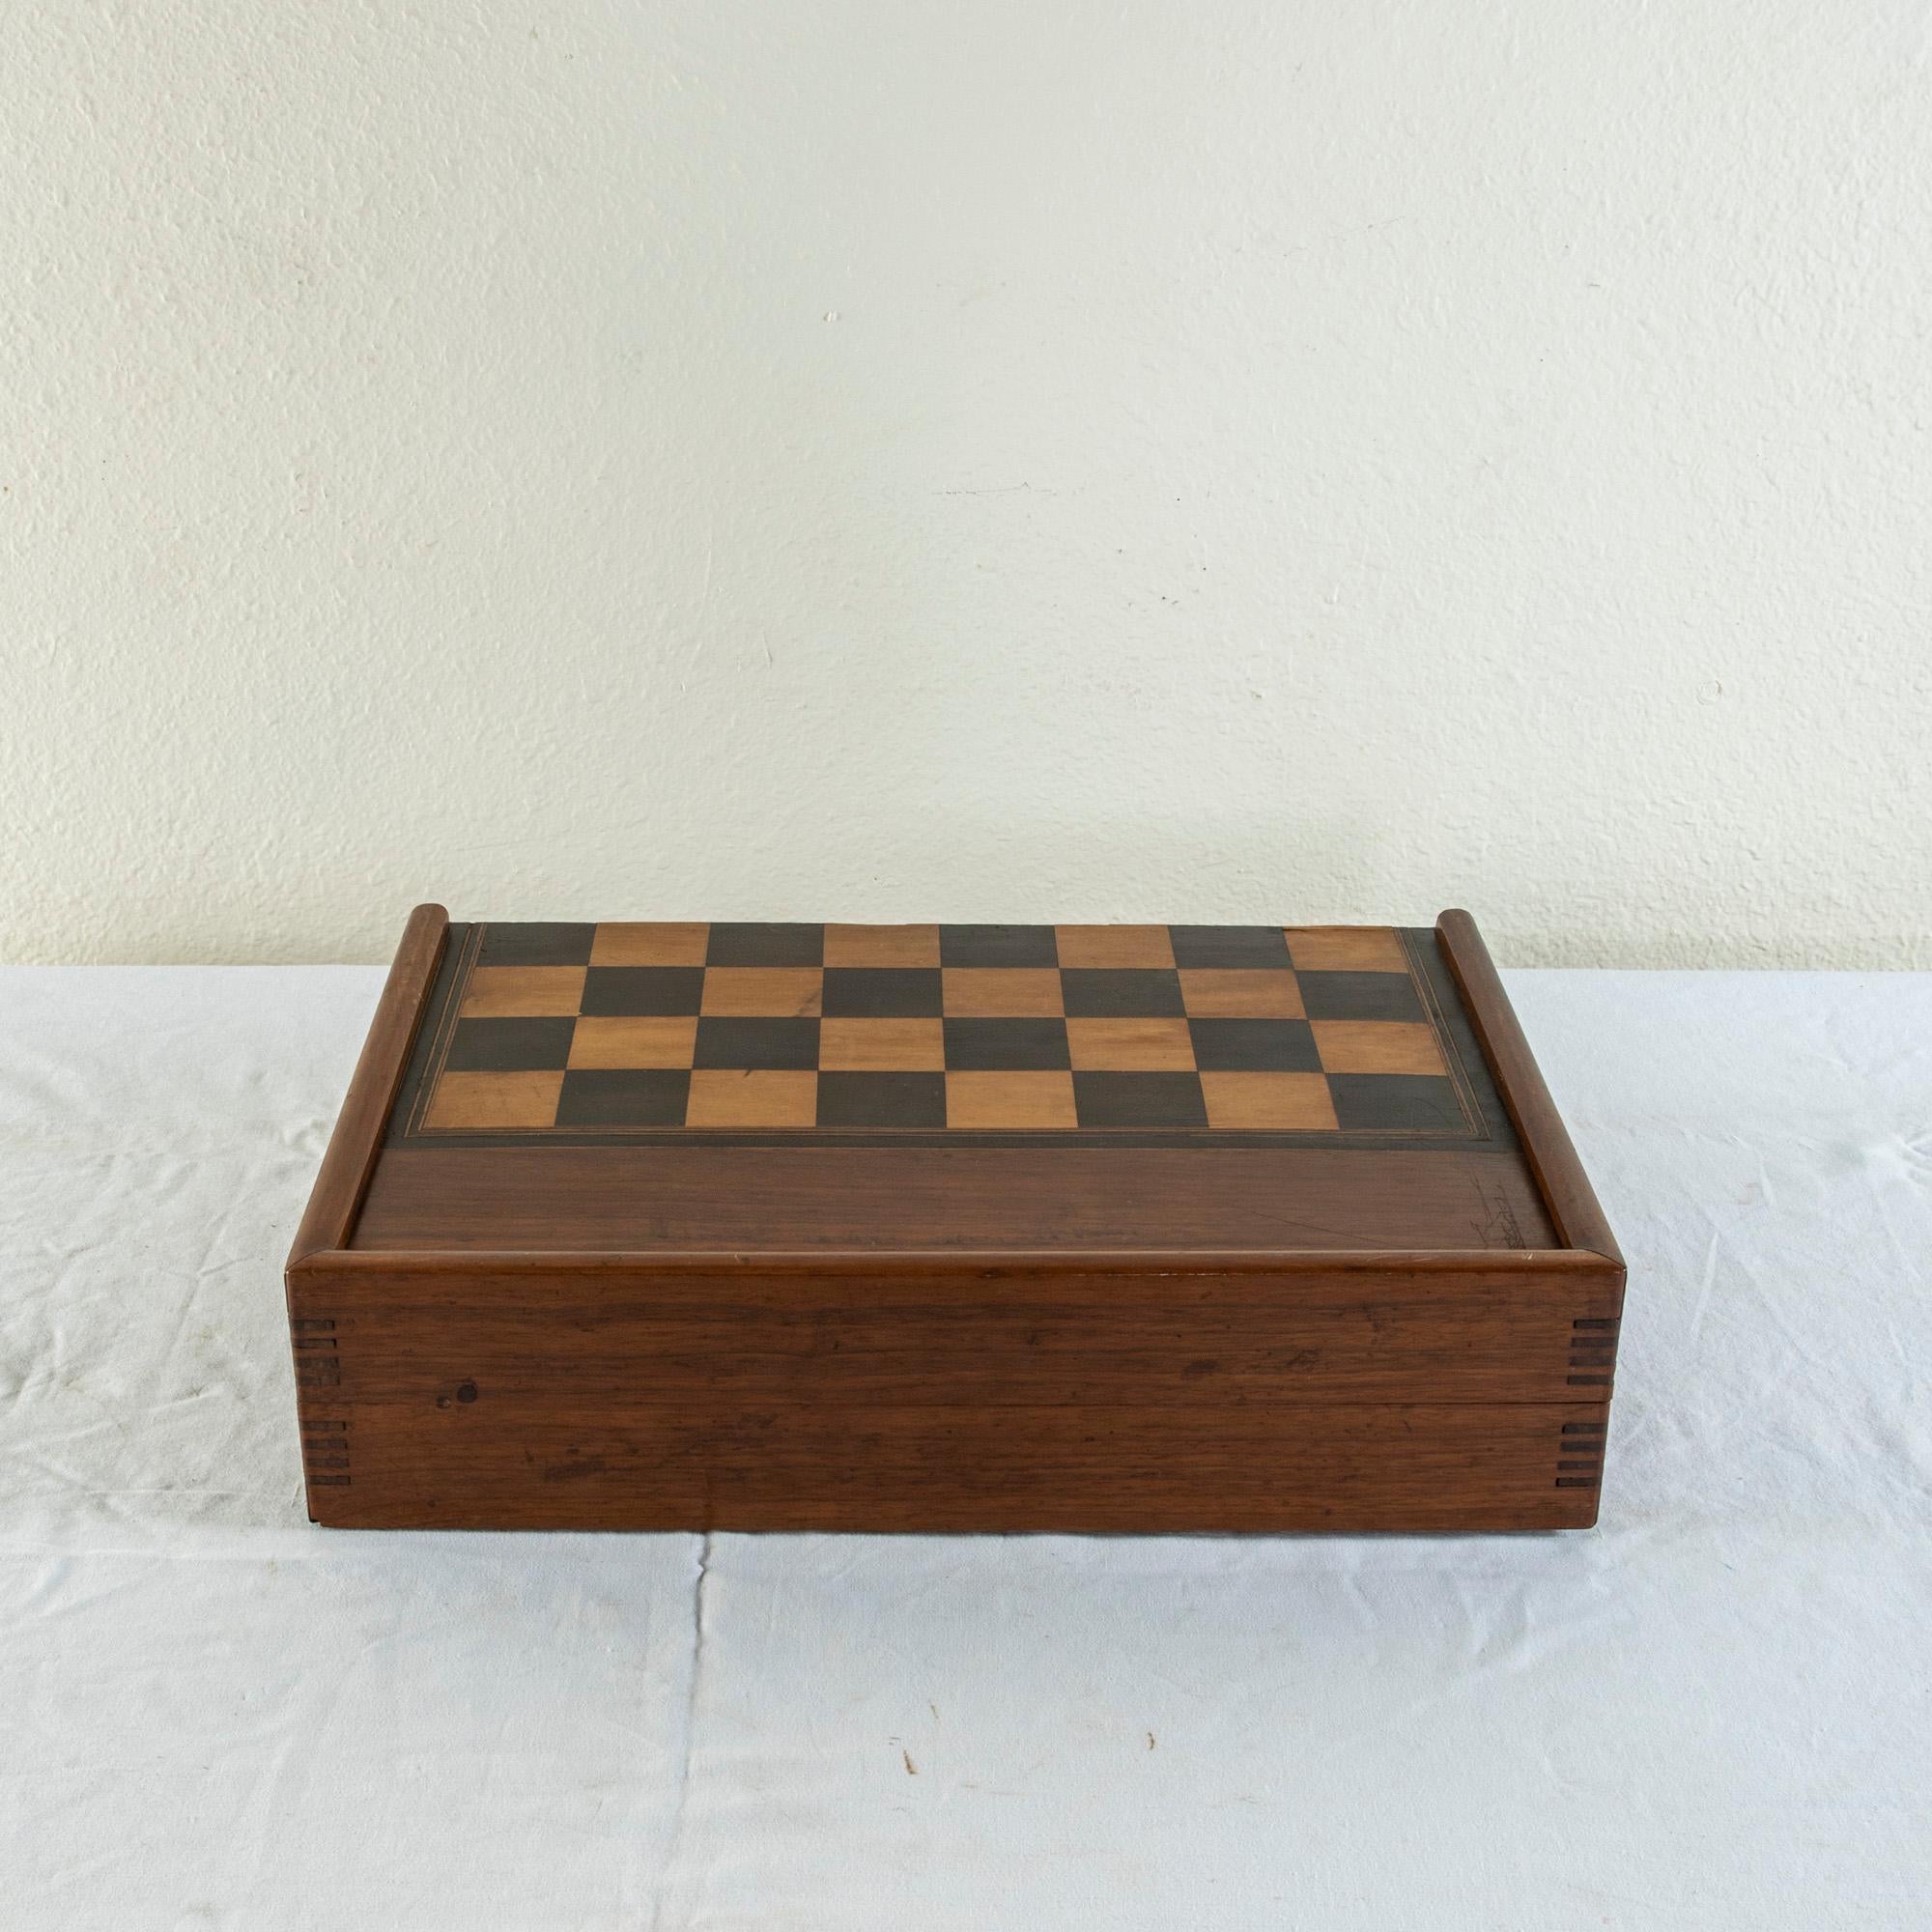 French 19th Century, Walnut Marquetry Folding Game Box for Chess, Checkers, Backgammon